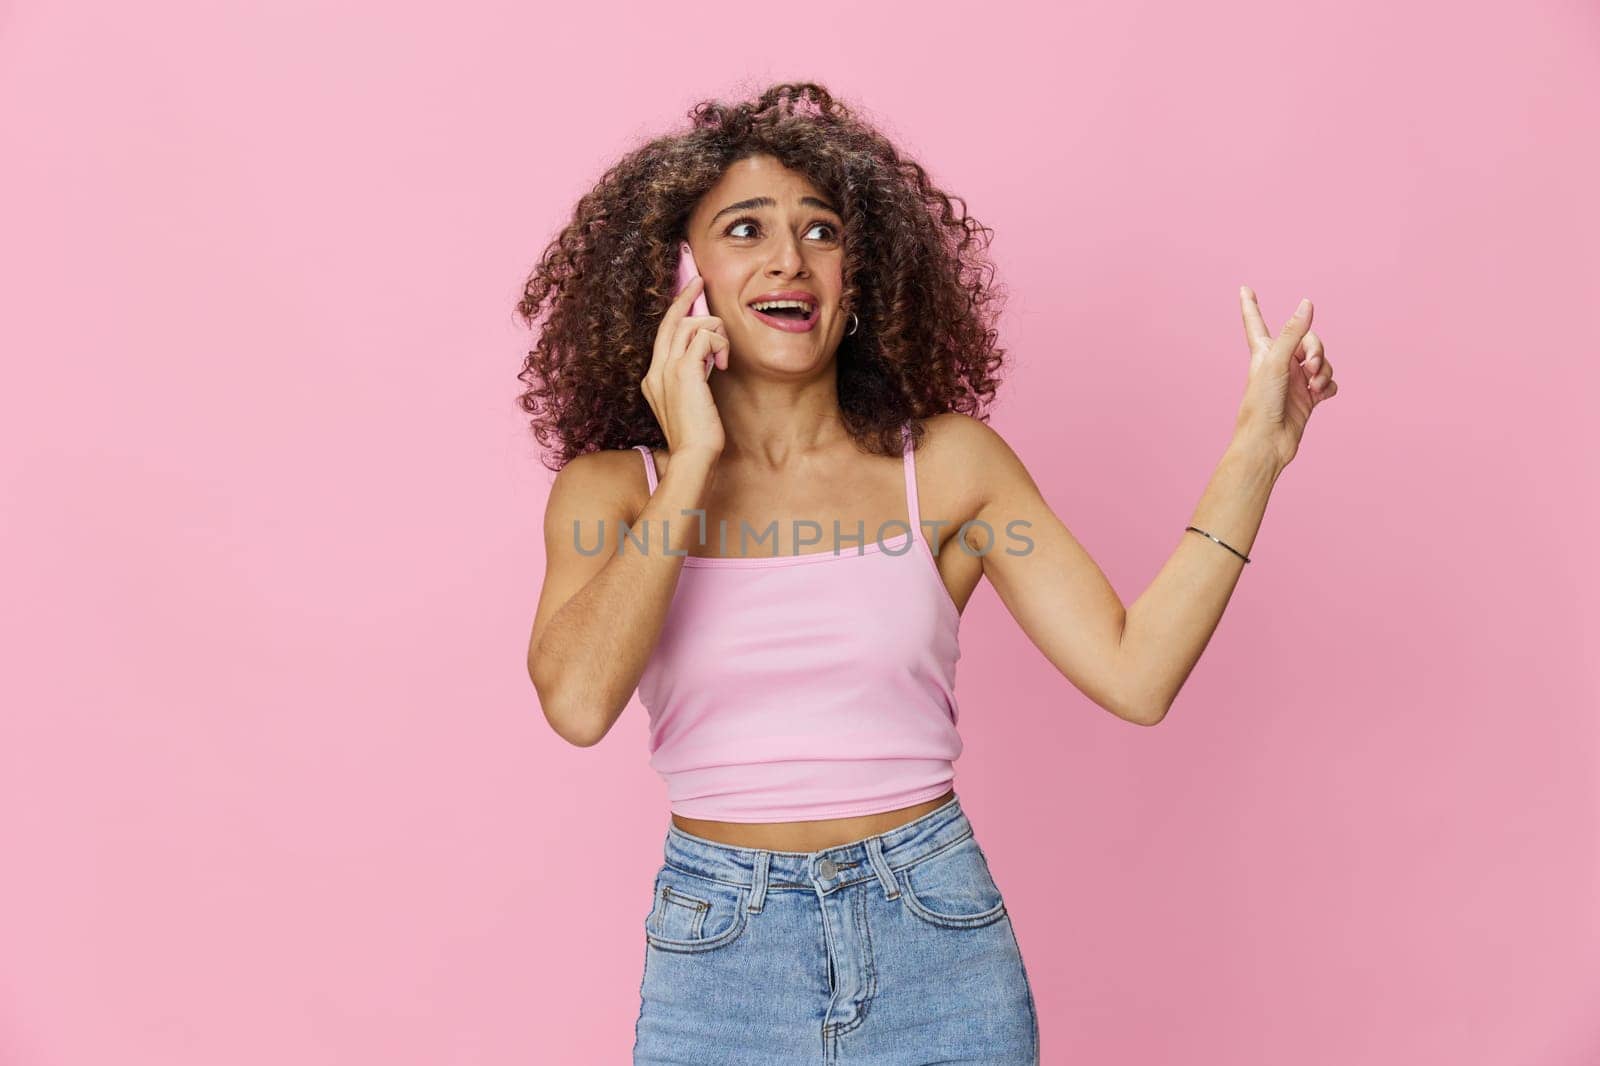 Woman with curly afro hair talking on the phone in a pink top and jeans on a pink background, smile, happiness, finger pointing copy space by SHOTPRIME